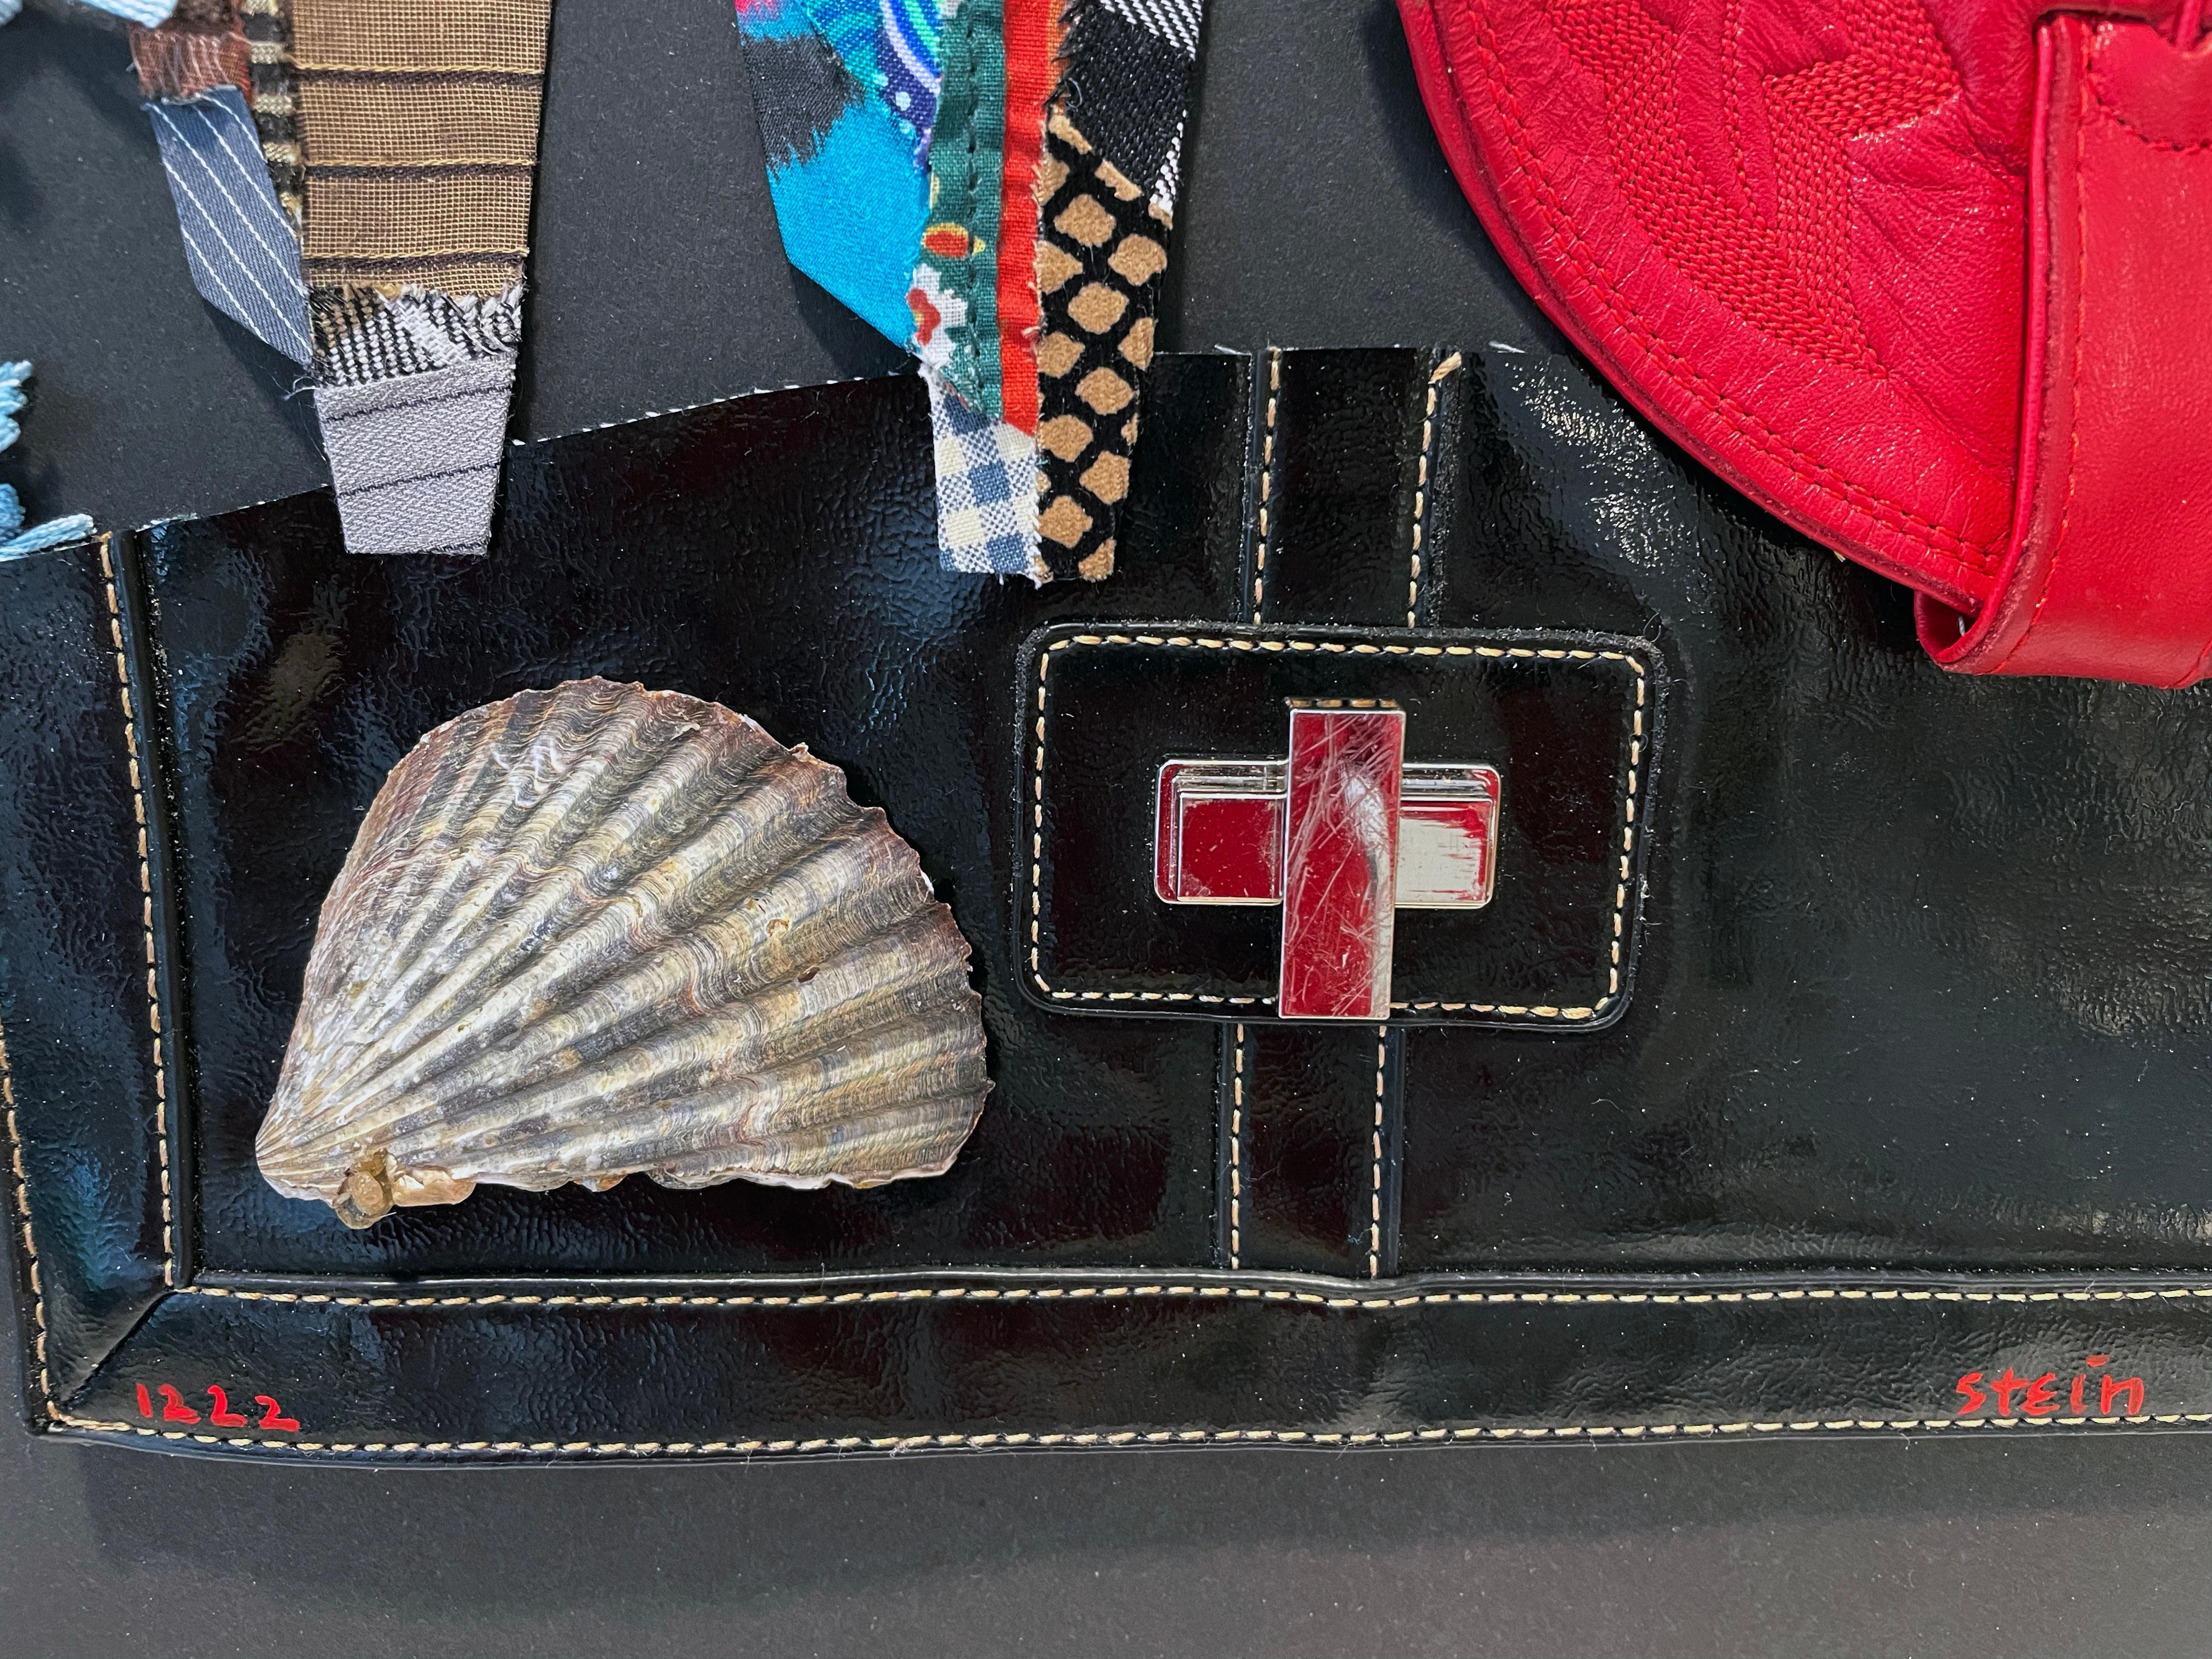 Linda Stein, 1222 - Contemporary Art 3D Mixed Media Fabric Sculptural Collage

Linda Stein started her Knights of Protection series after she was forced to evacuate her New York downtown studio for a year post-9/11.  Stein's Knights are shield-like